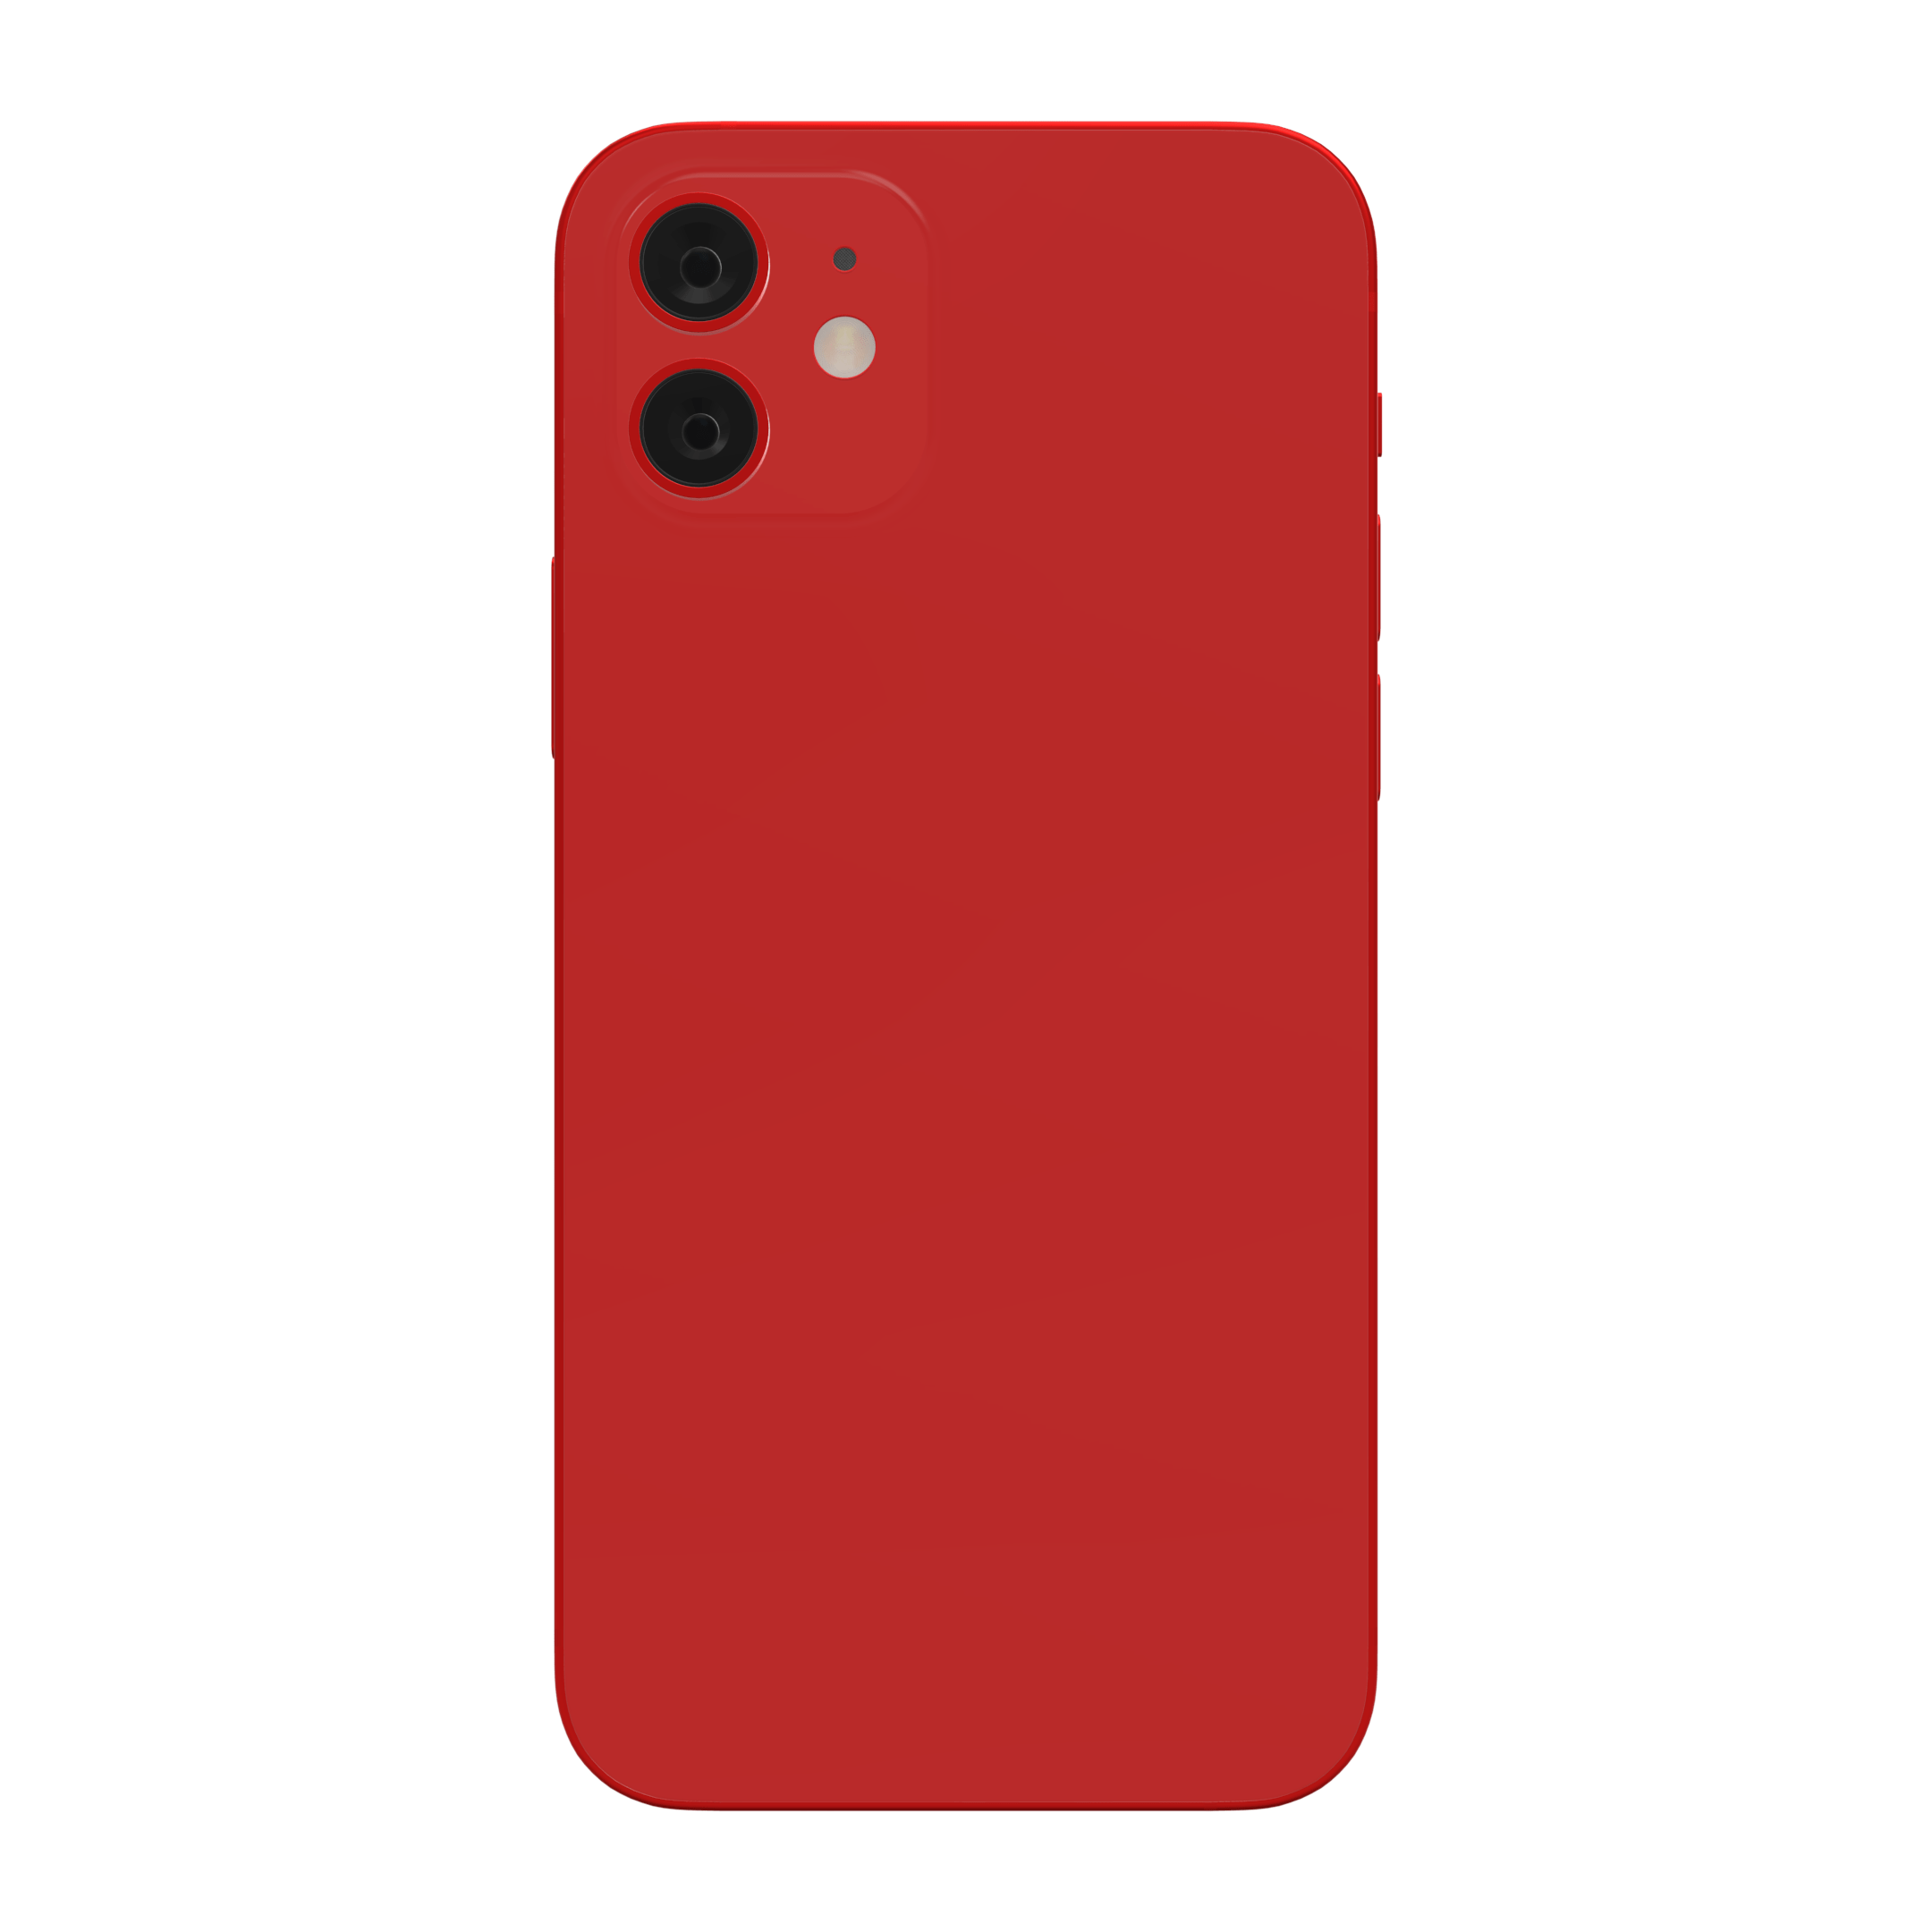 Product RED iPhone 12 mockup